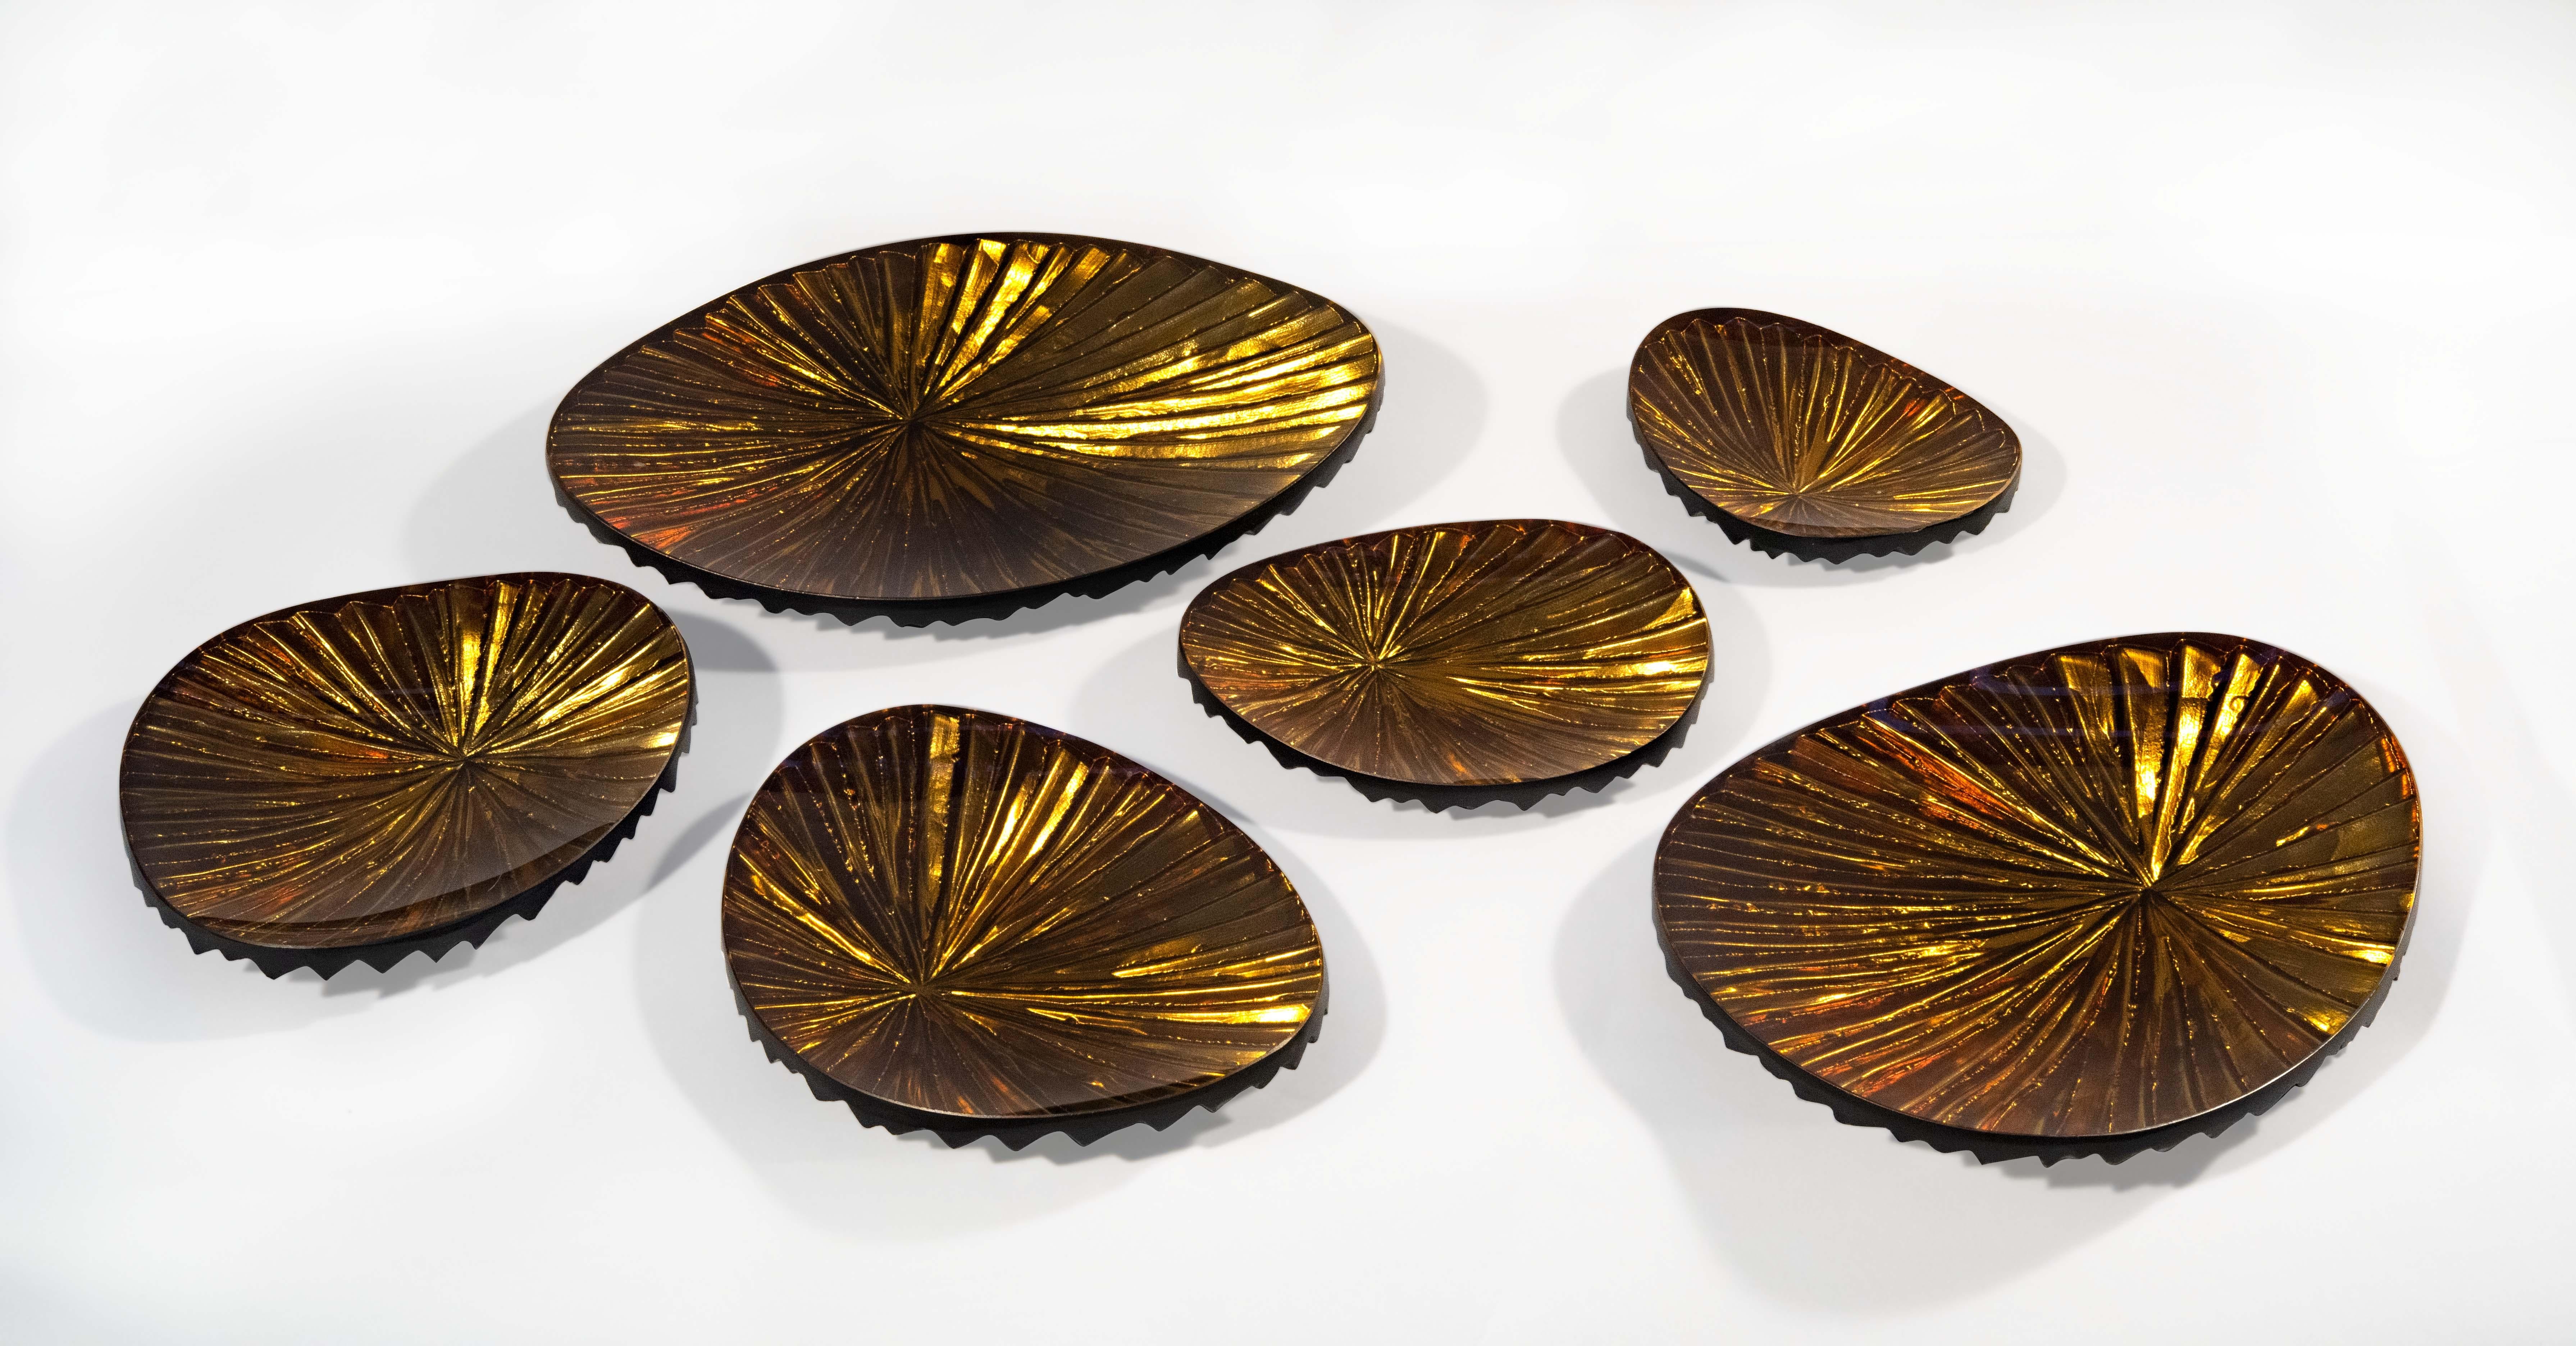 Hand-Crafted Contemporary 'Oasi' Bowl Amber and Gold Crystal Medium Size by Ghirò Studio For Sale